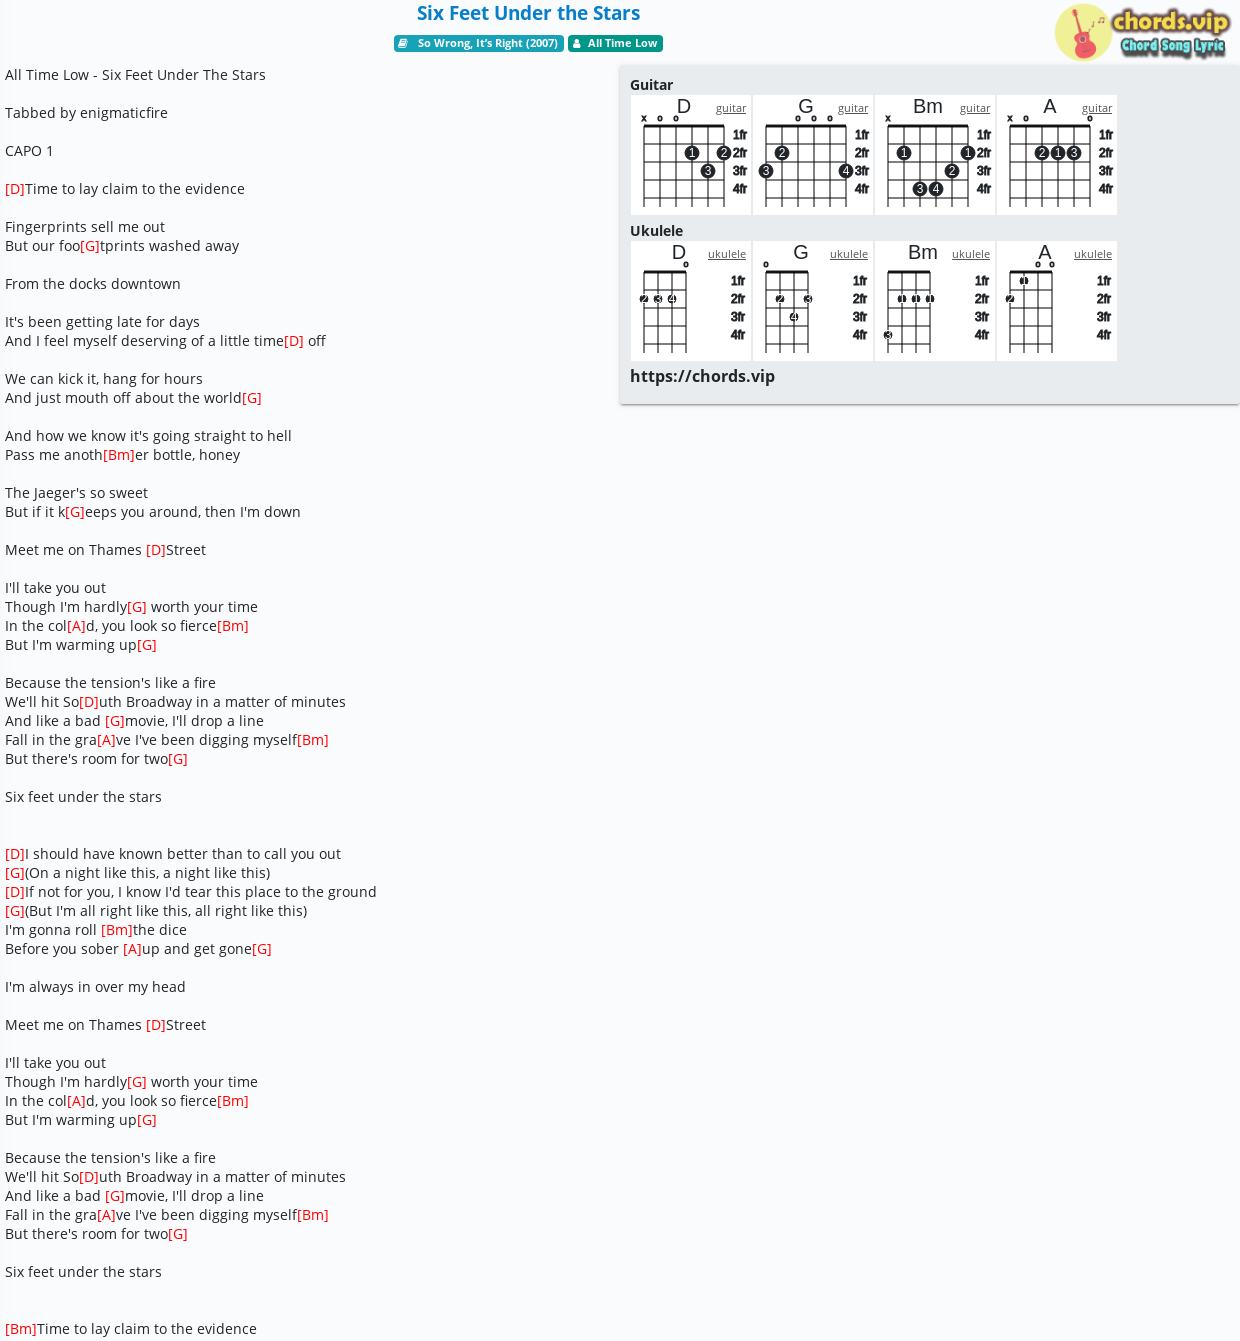 Six Feet Under the - All Time Low - tab, song lyric, sheet, guitar, ukulele | chords.vip